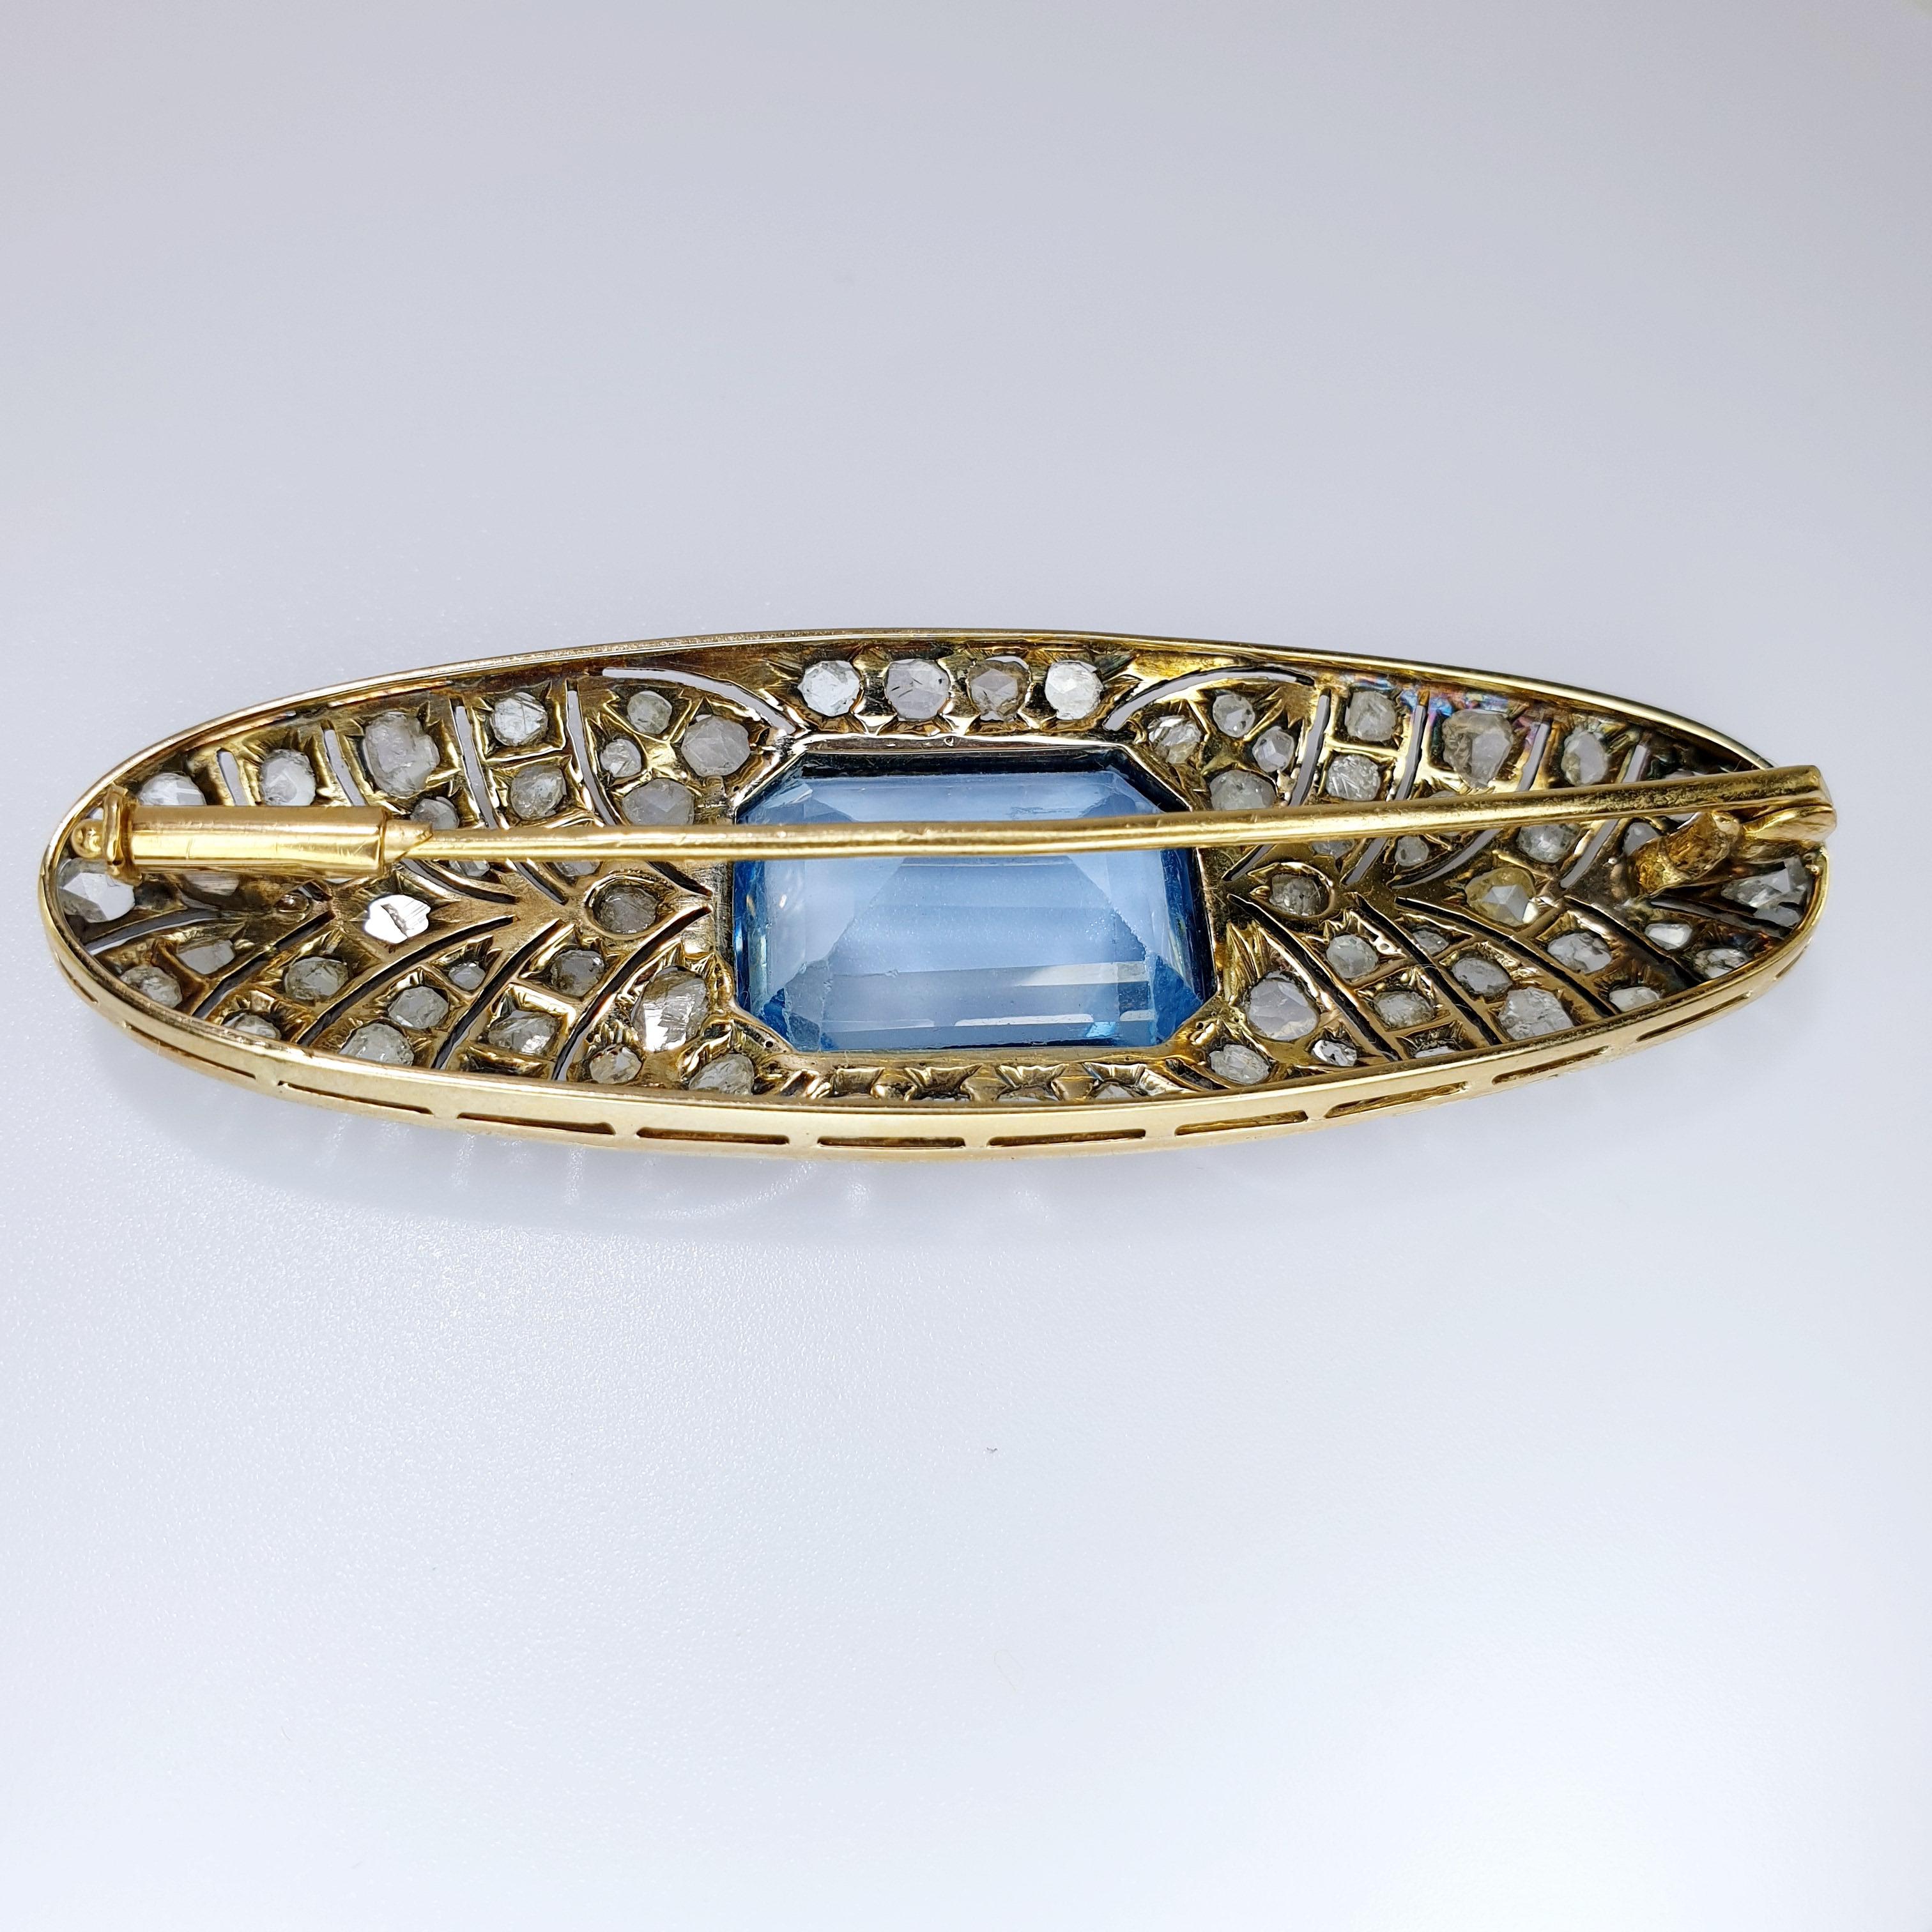 This beautiful Art Deco Brooch in oval shape has a center blue colored stone in emerald cut.
the old cut diamonds rest in band of spikes on platinum base and reverse of 18k rose gold 

READY TO SHIP
*Shipment of this piece is not affected by